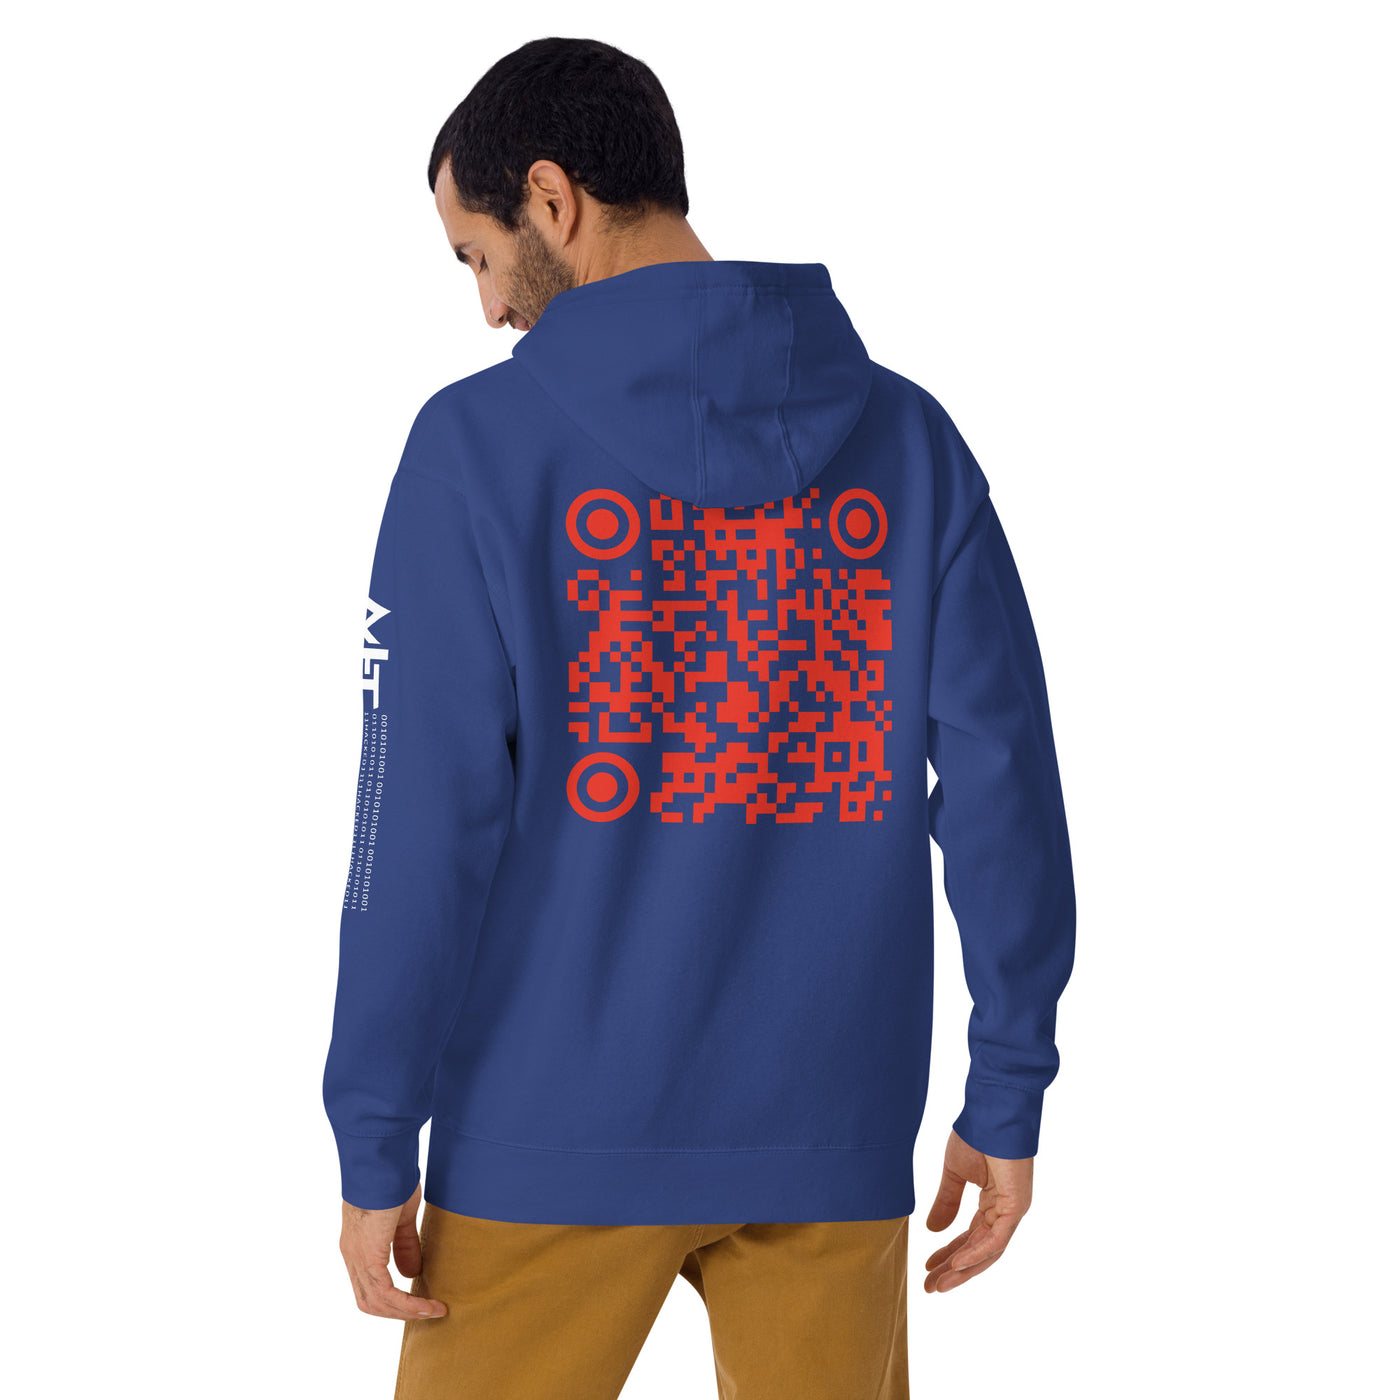 Who's the New Kid, Hacker, Developer, Gamer, Crypto King V1  - Unisex Hoodie Personalized QR Code